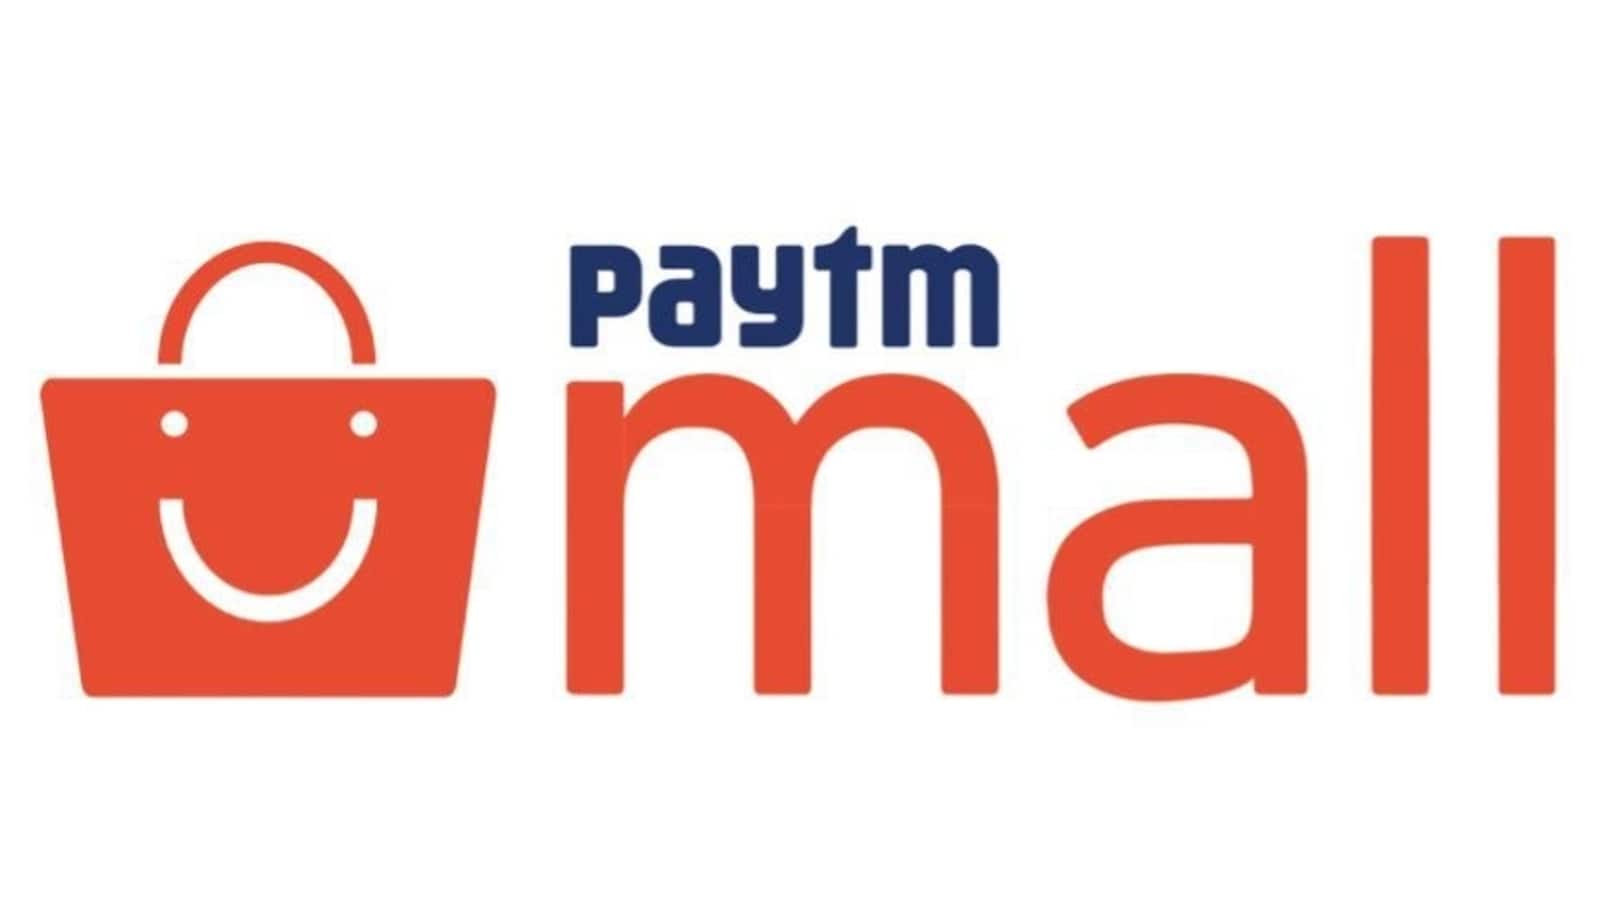 Website retracts claim on Paytm Mall 'data breach'. Company says  'vindicated' - Hindustan Times